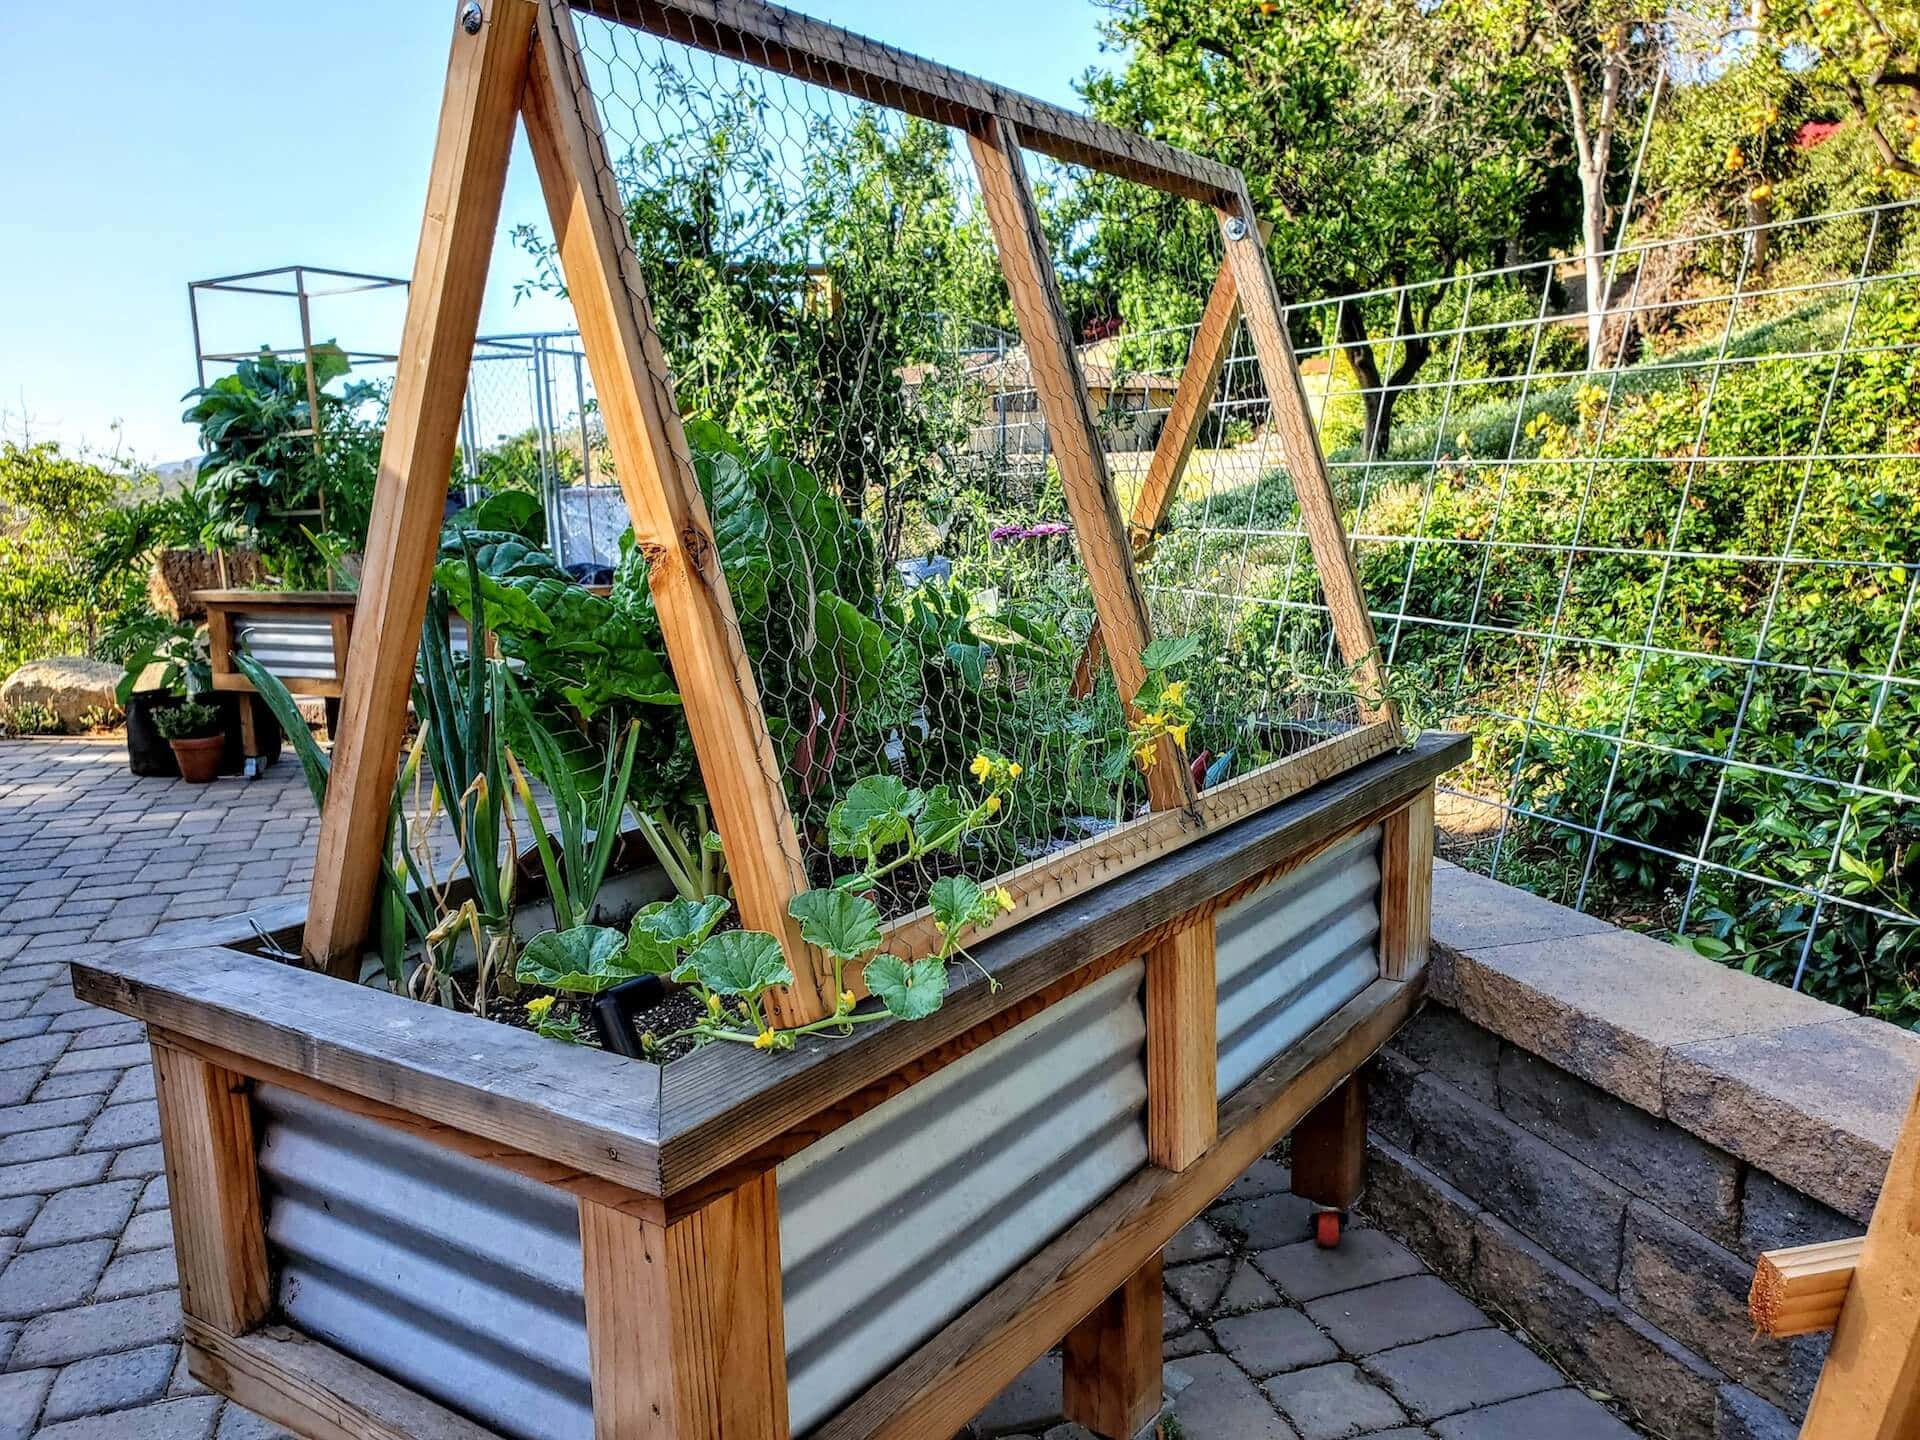 A picture of a cucumber trellis, providing support for growing cucumber plants